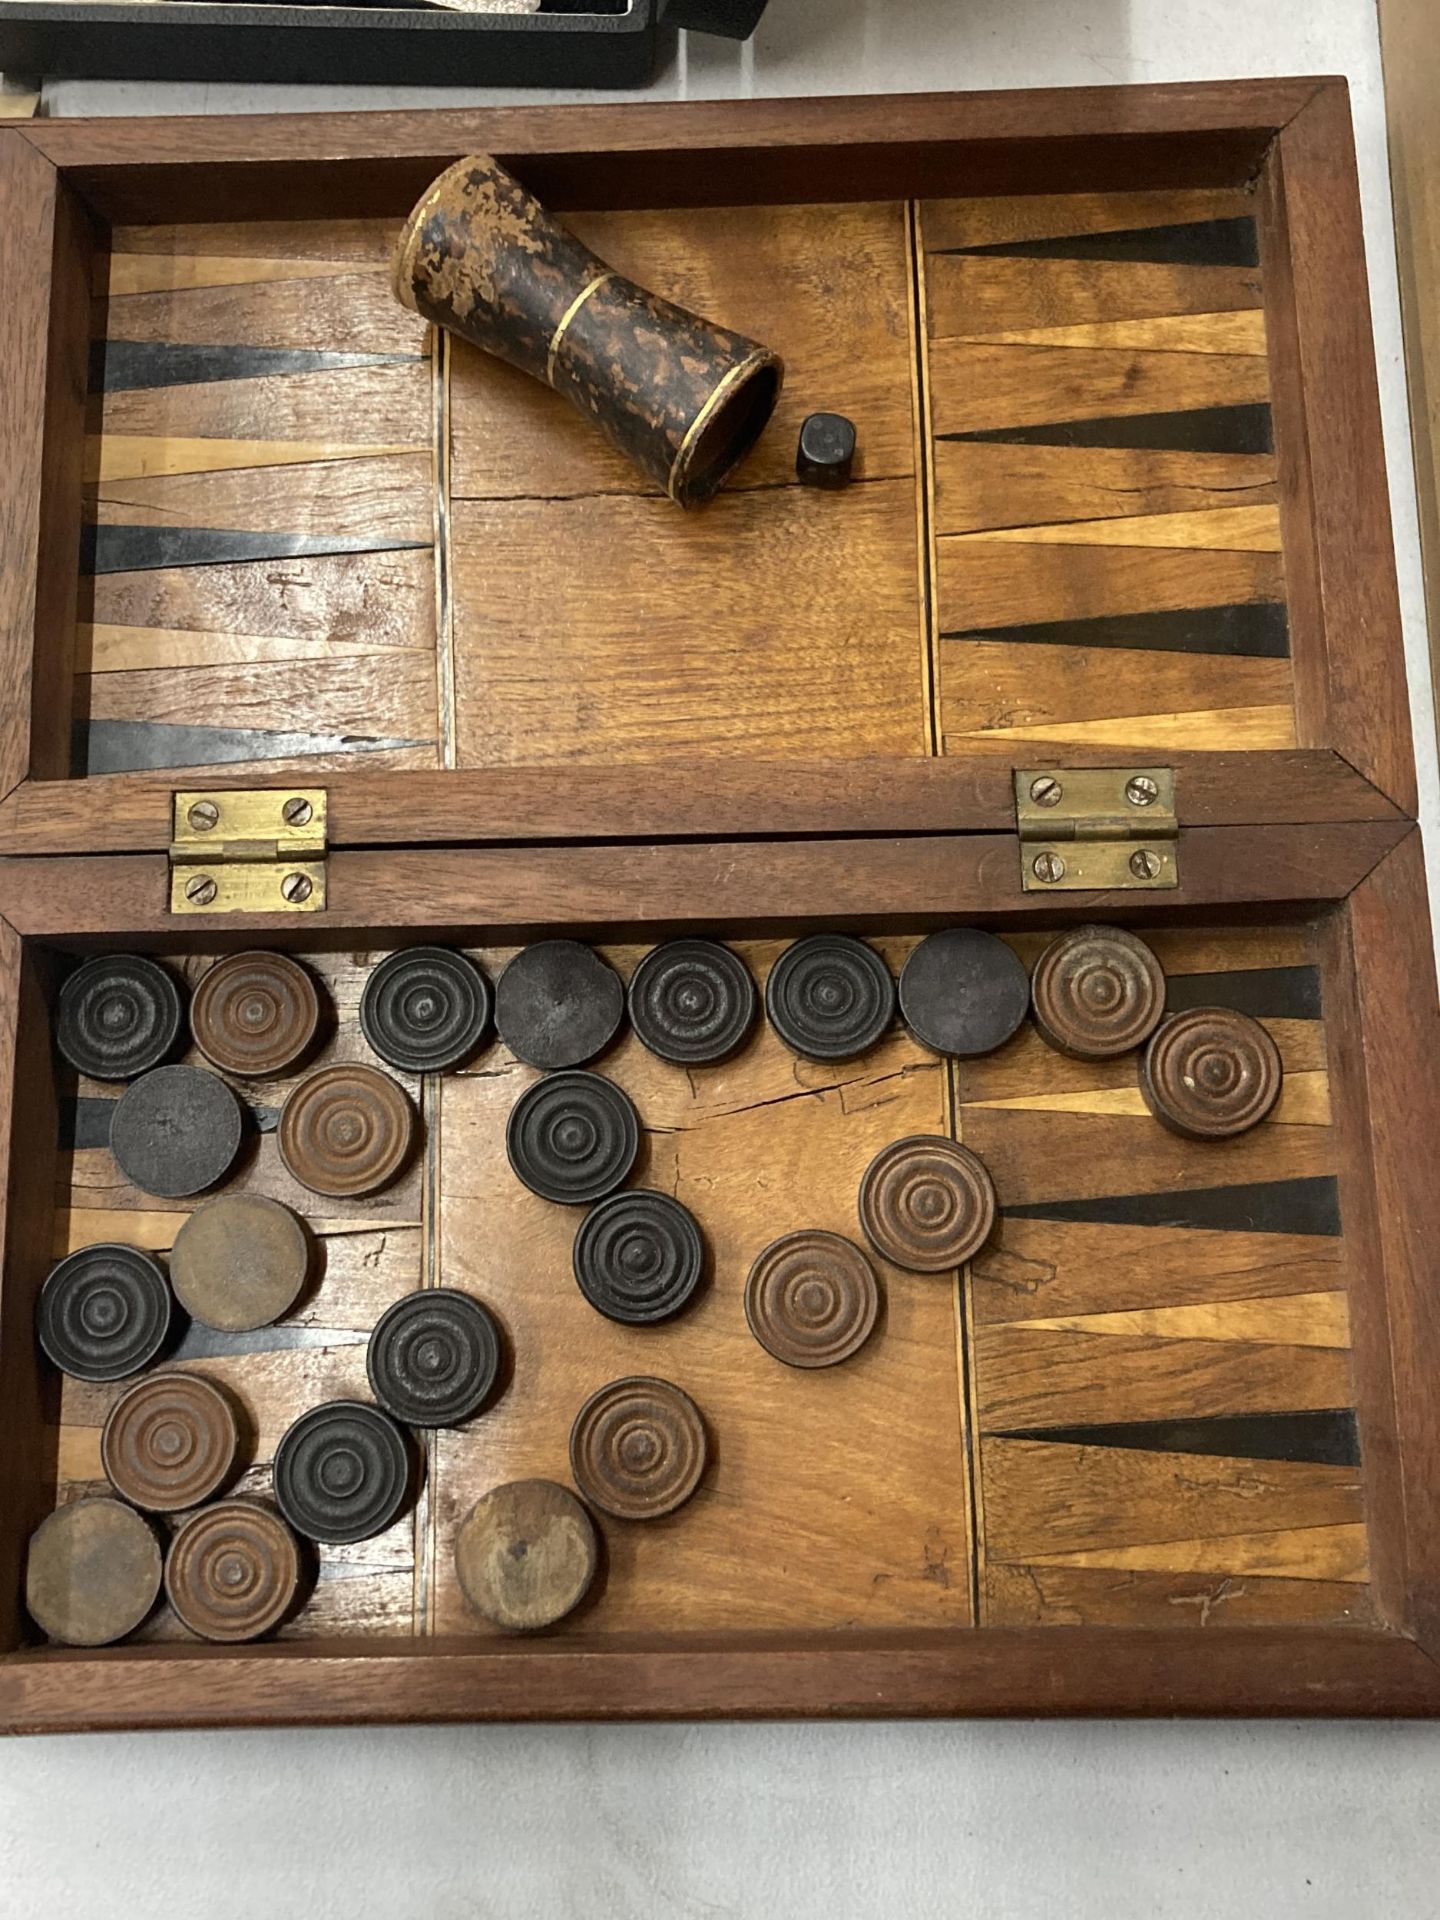 A FOLDING CHESS/BACKGAMMON BOX WITH COUNTERS, DICE AND SHAKER